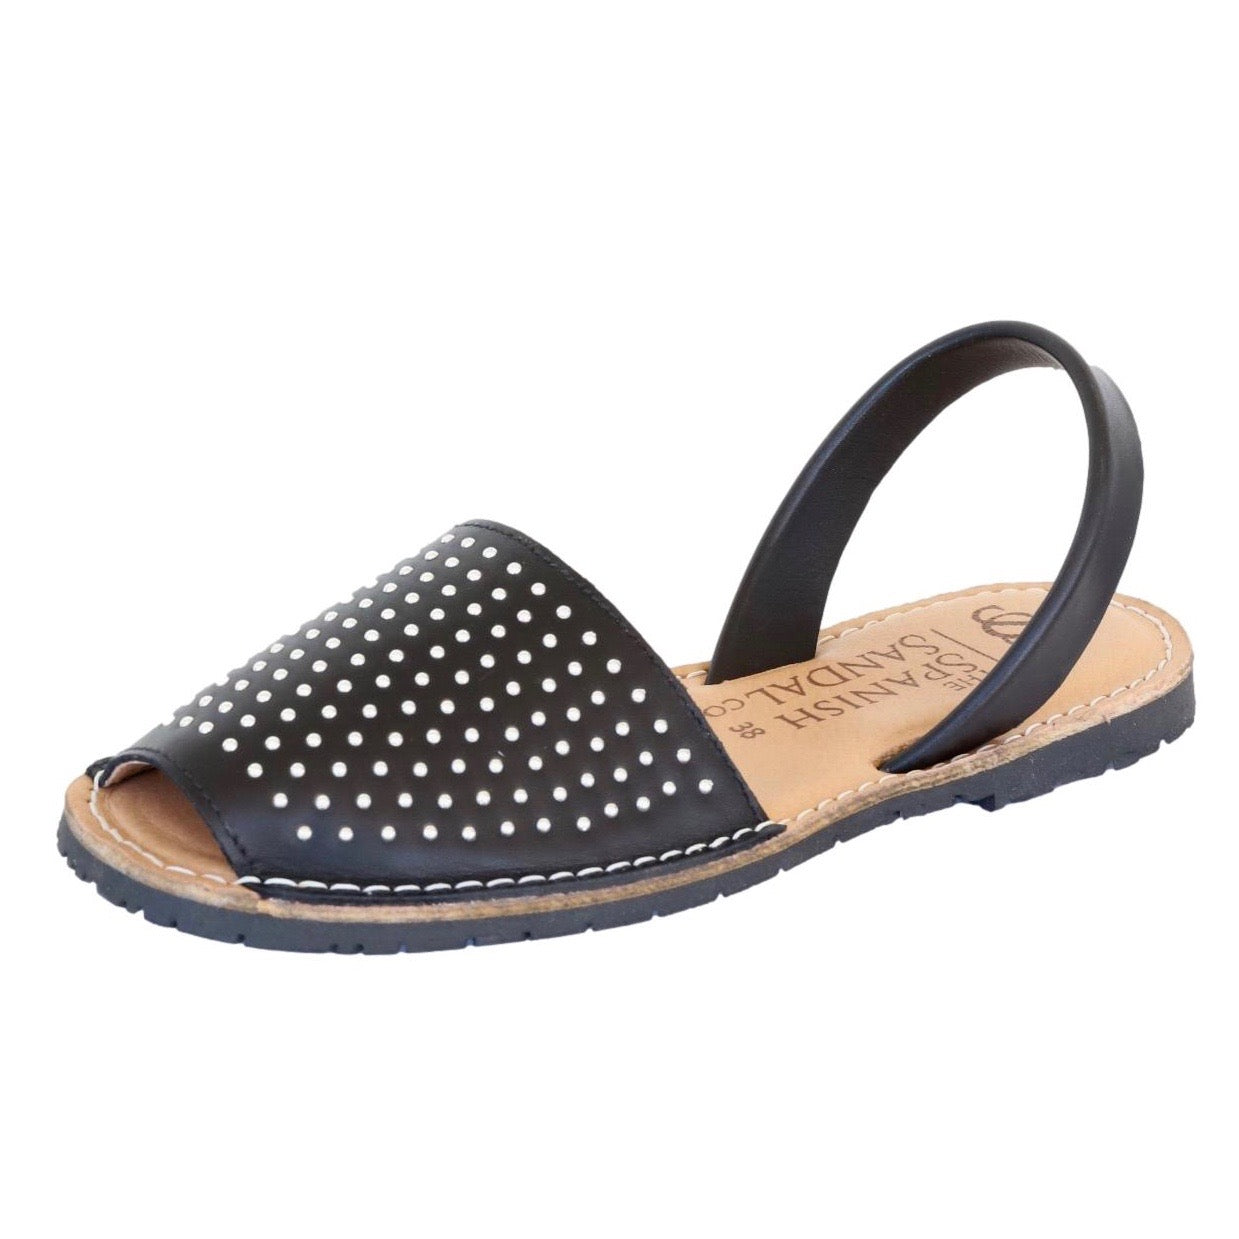 black studded sandals - angle view